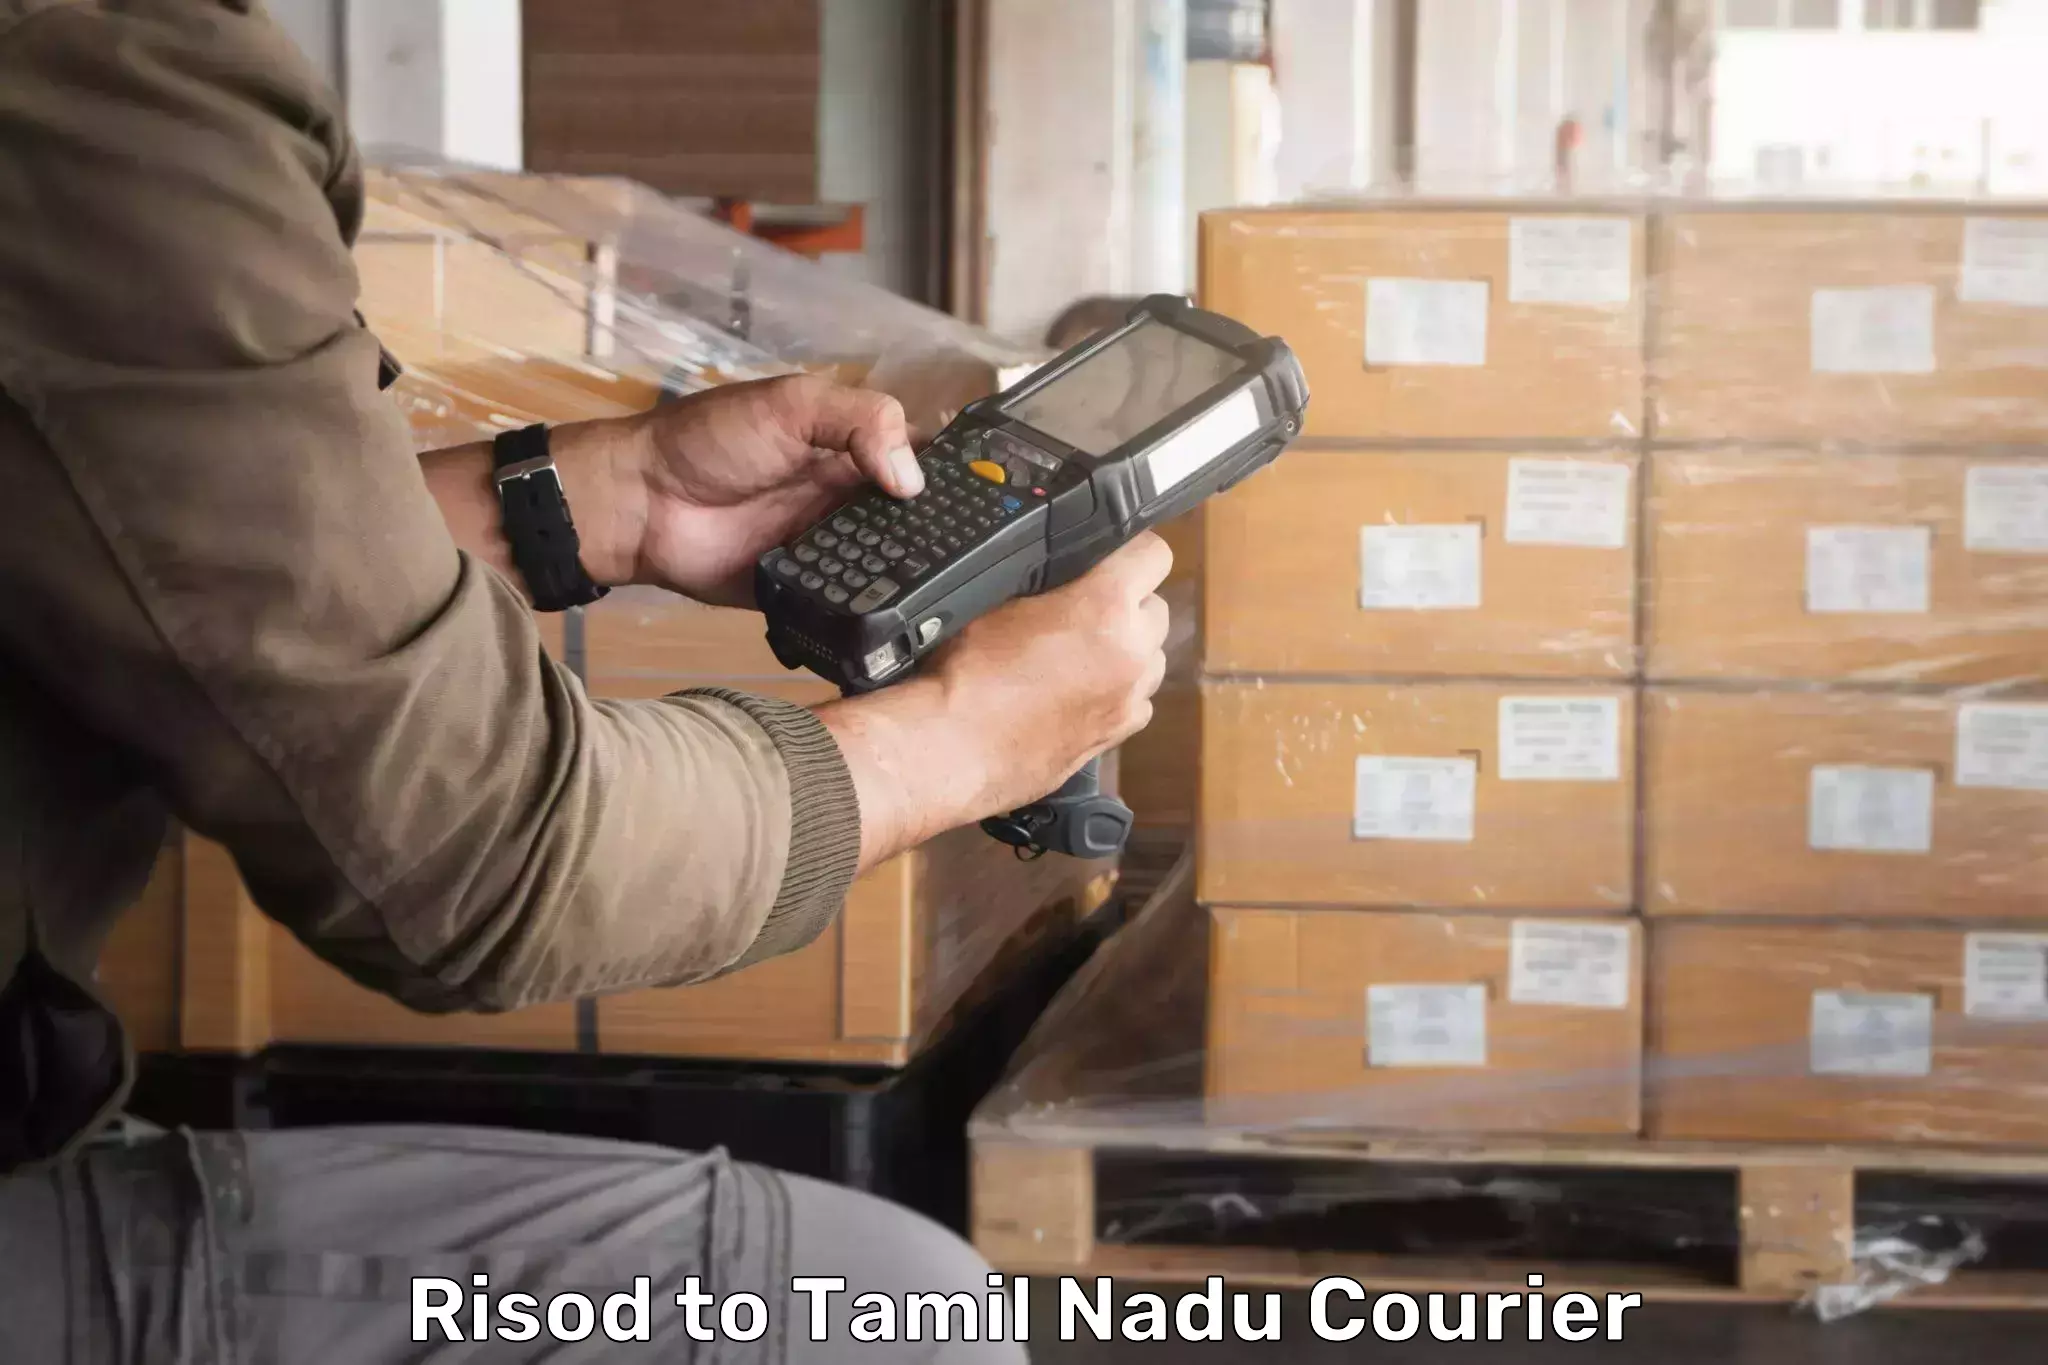 Reliable courier services Risod to Peralam